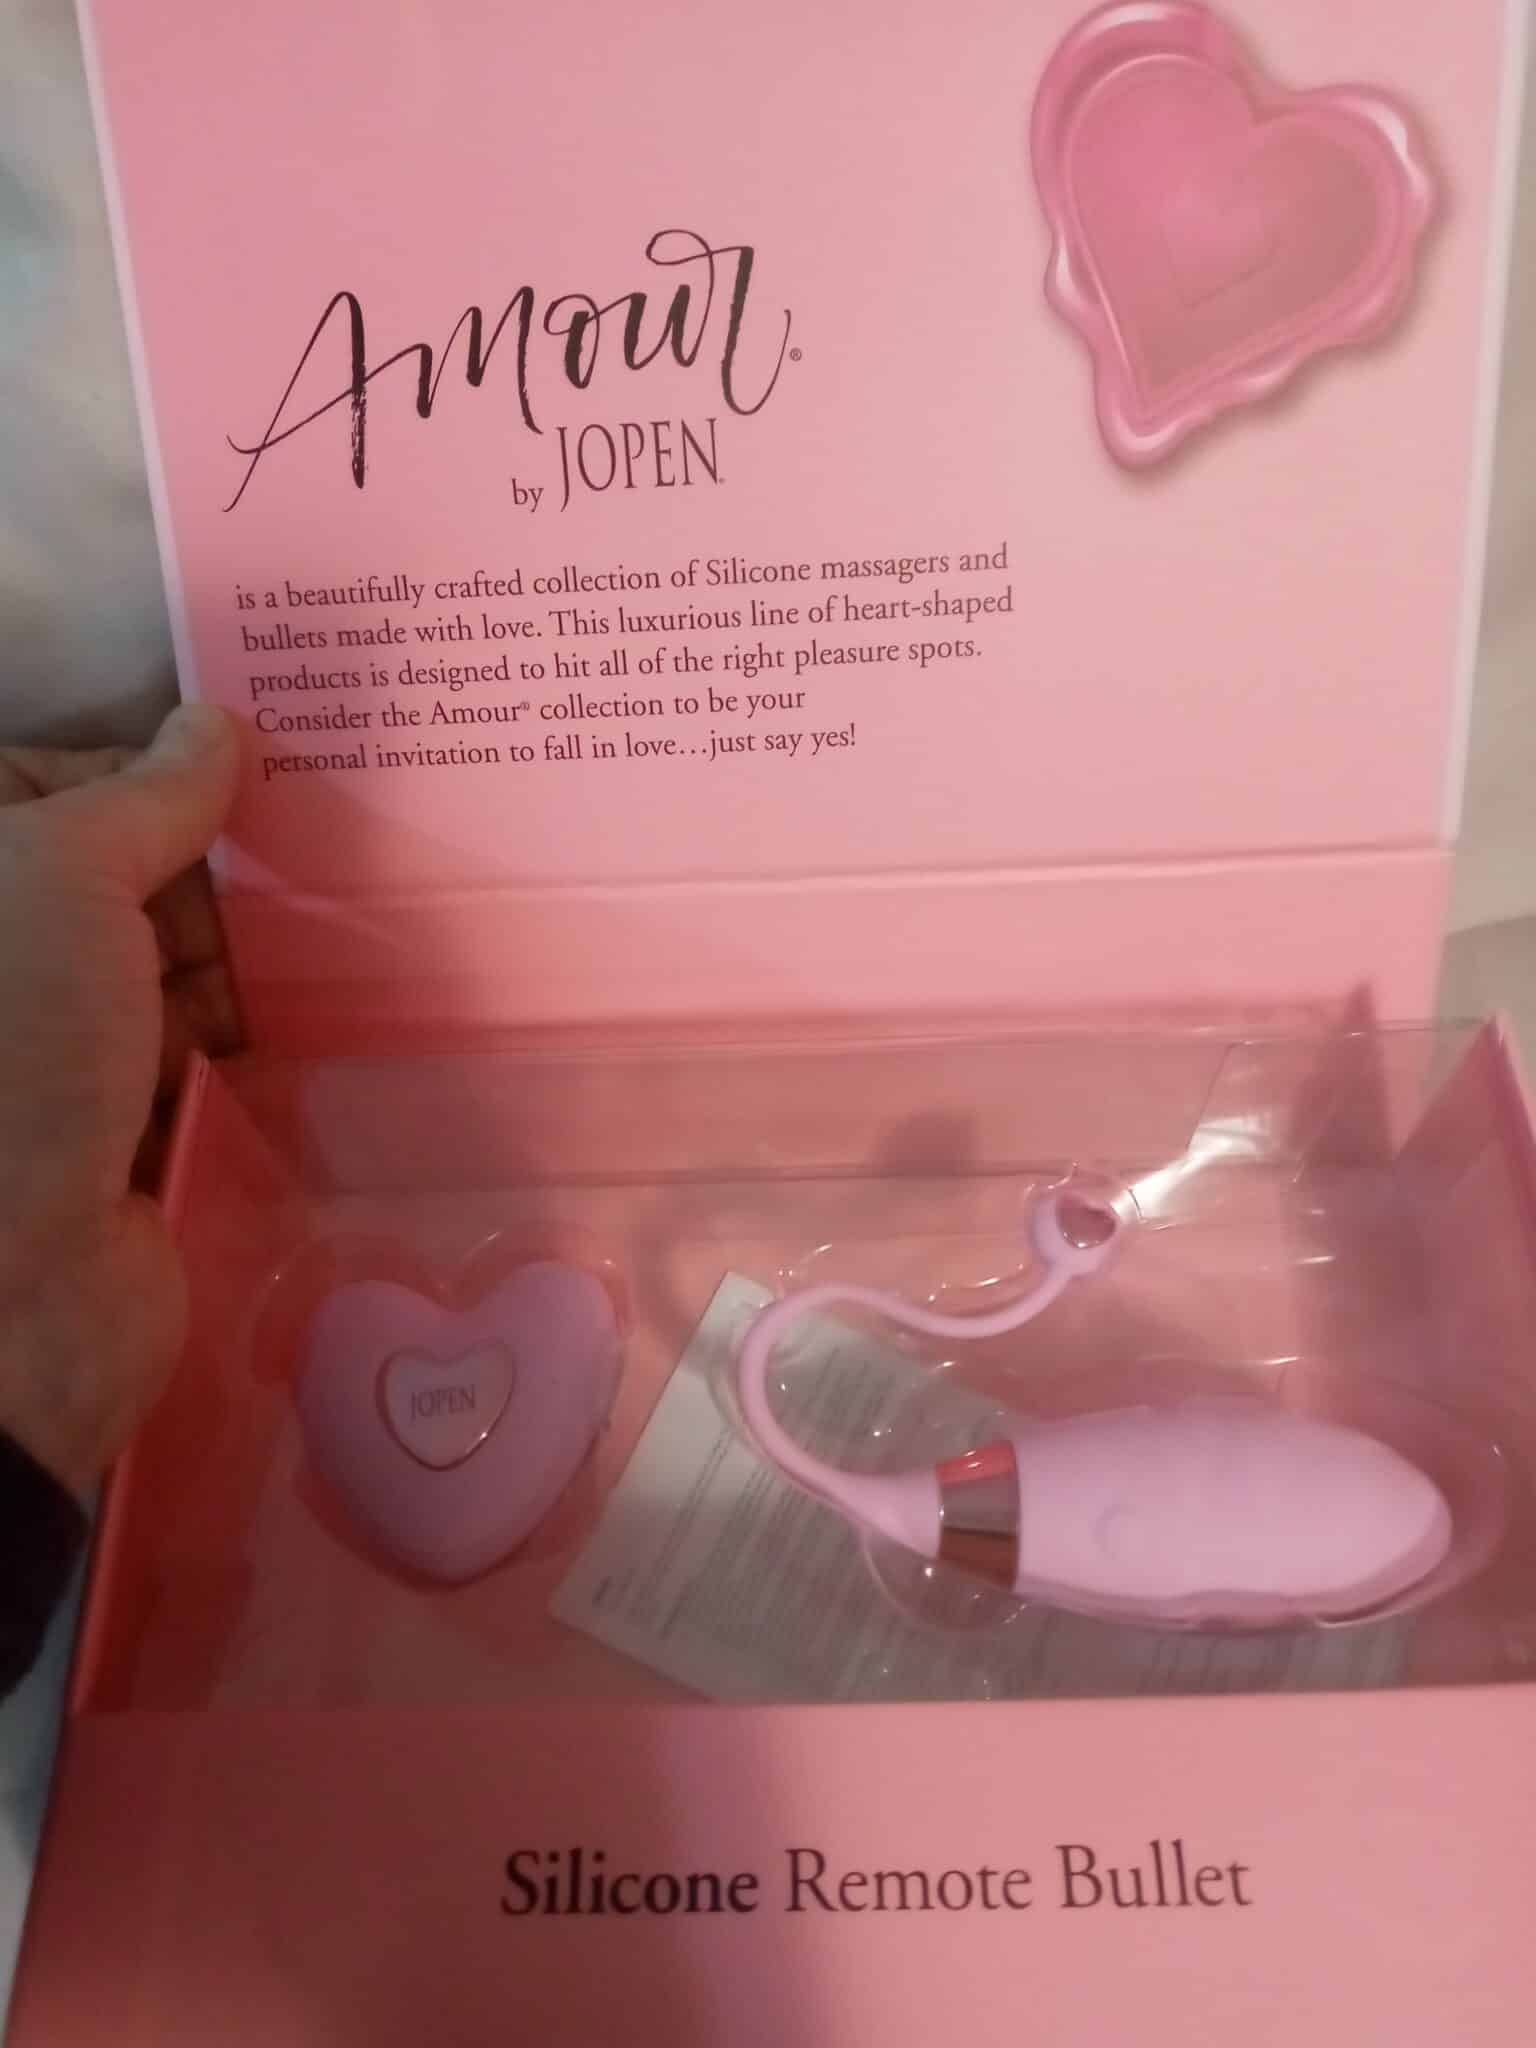 Jopen Amour Unboxing the Jopen Amour : First Impressions